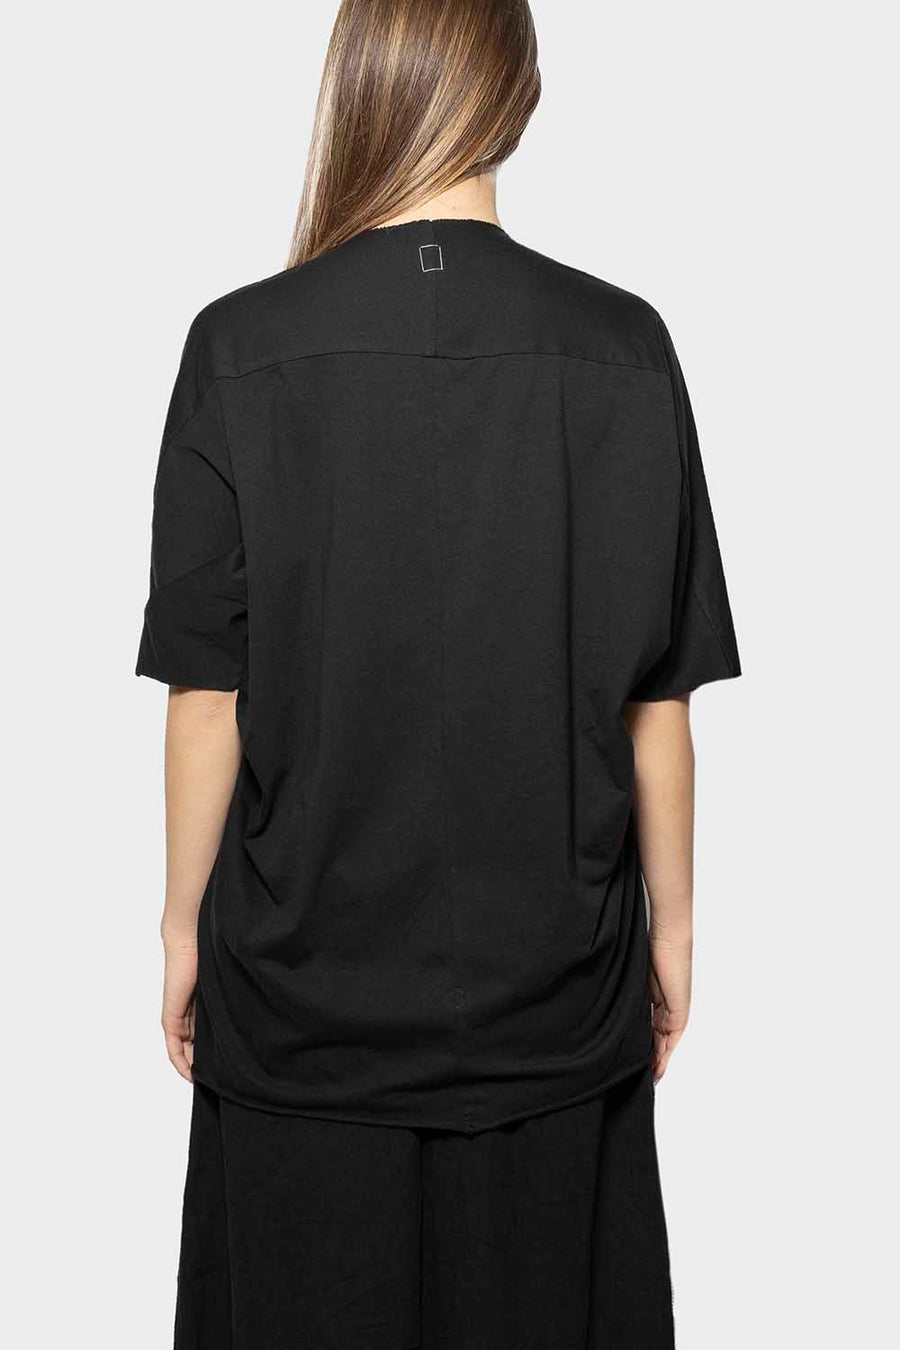 T-shirt Oversize Isabella Clementini in jersey nero  i1285